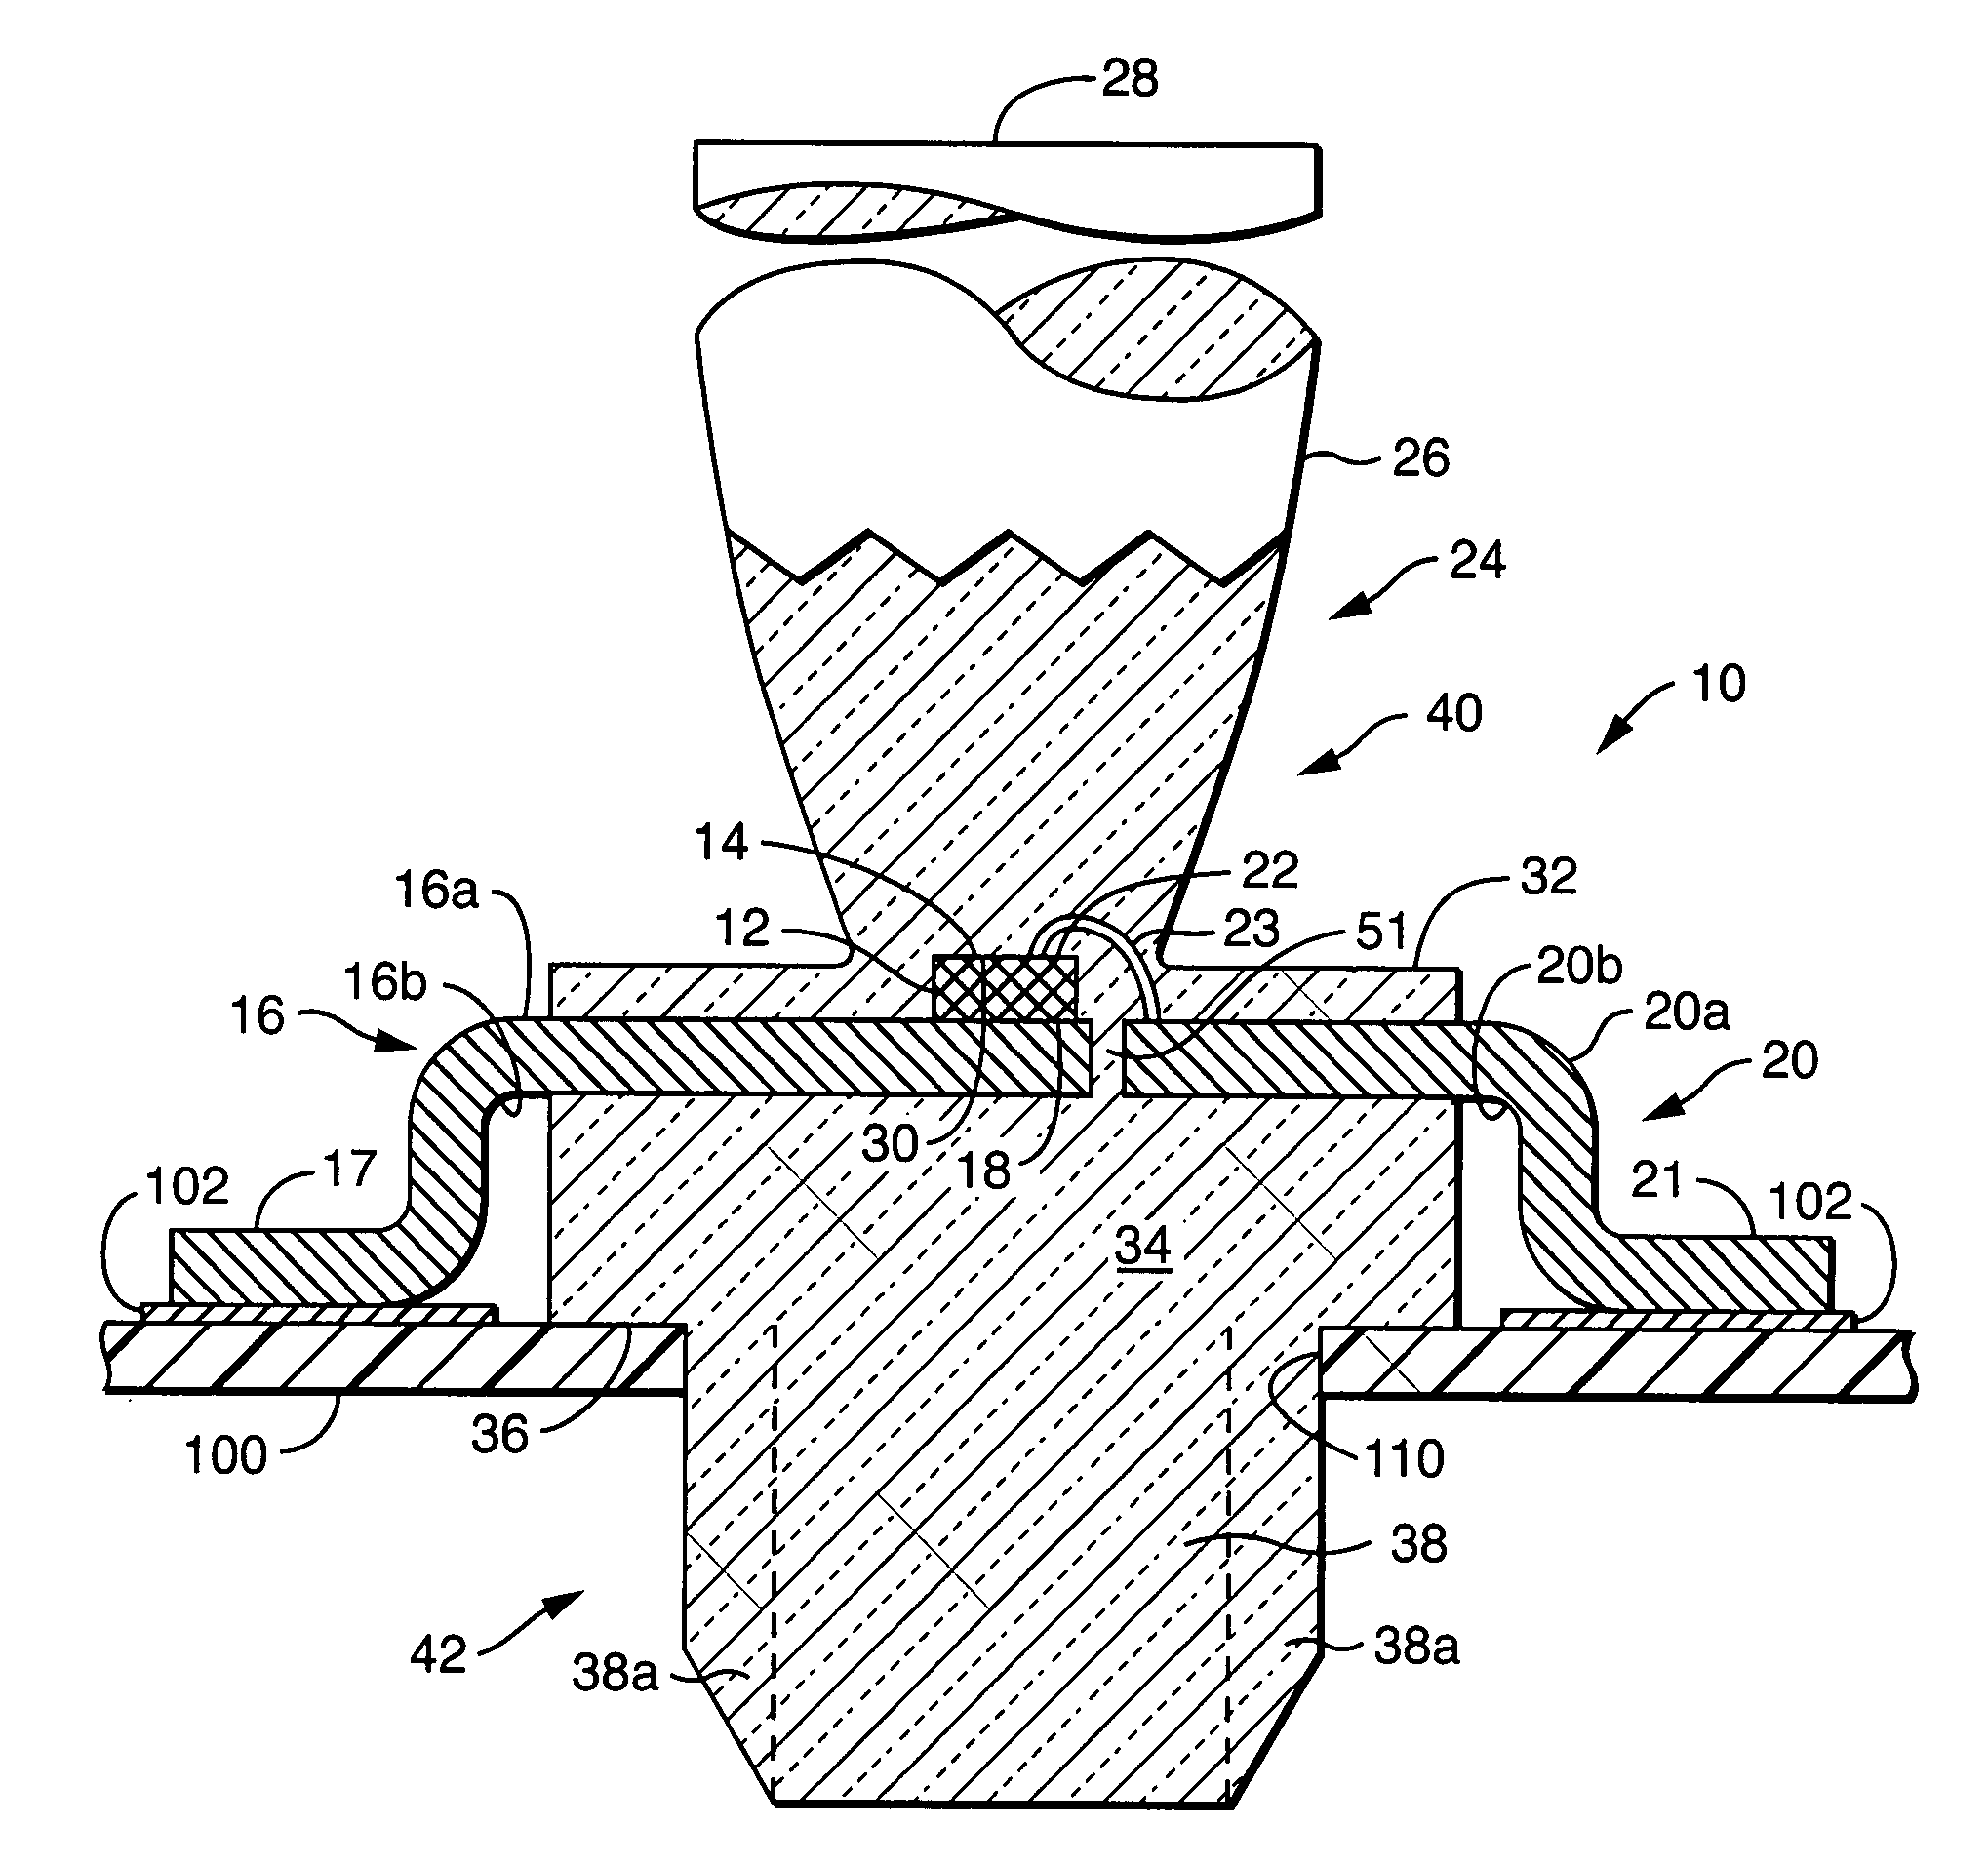 Light emitting diode with direct view optic